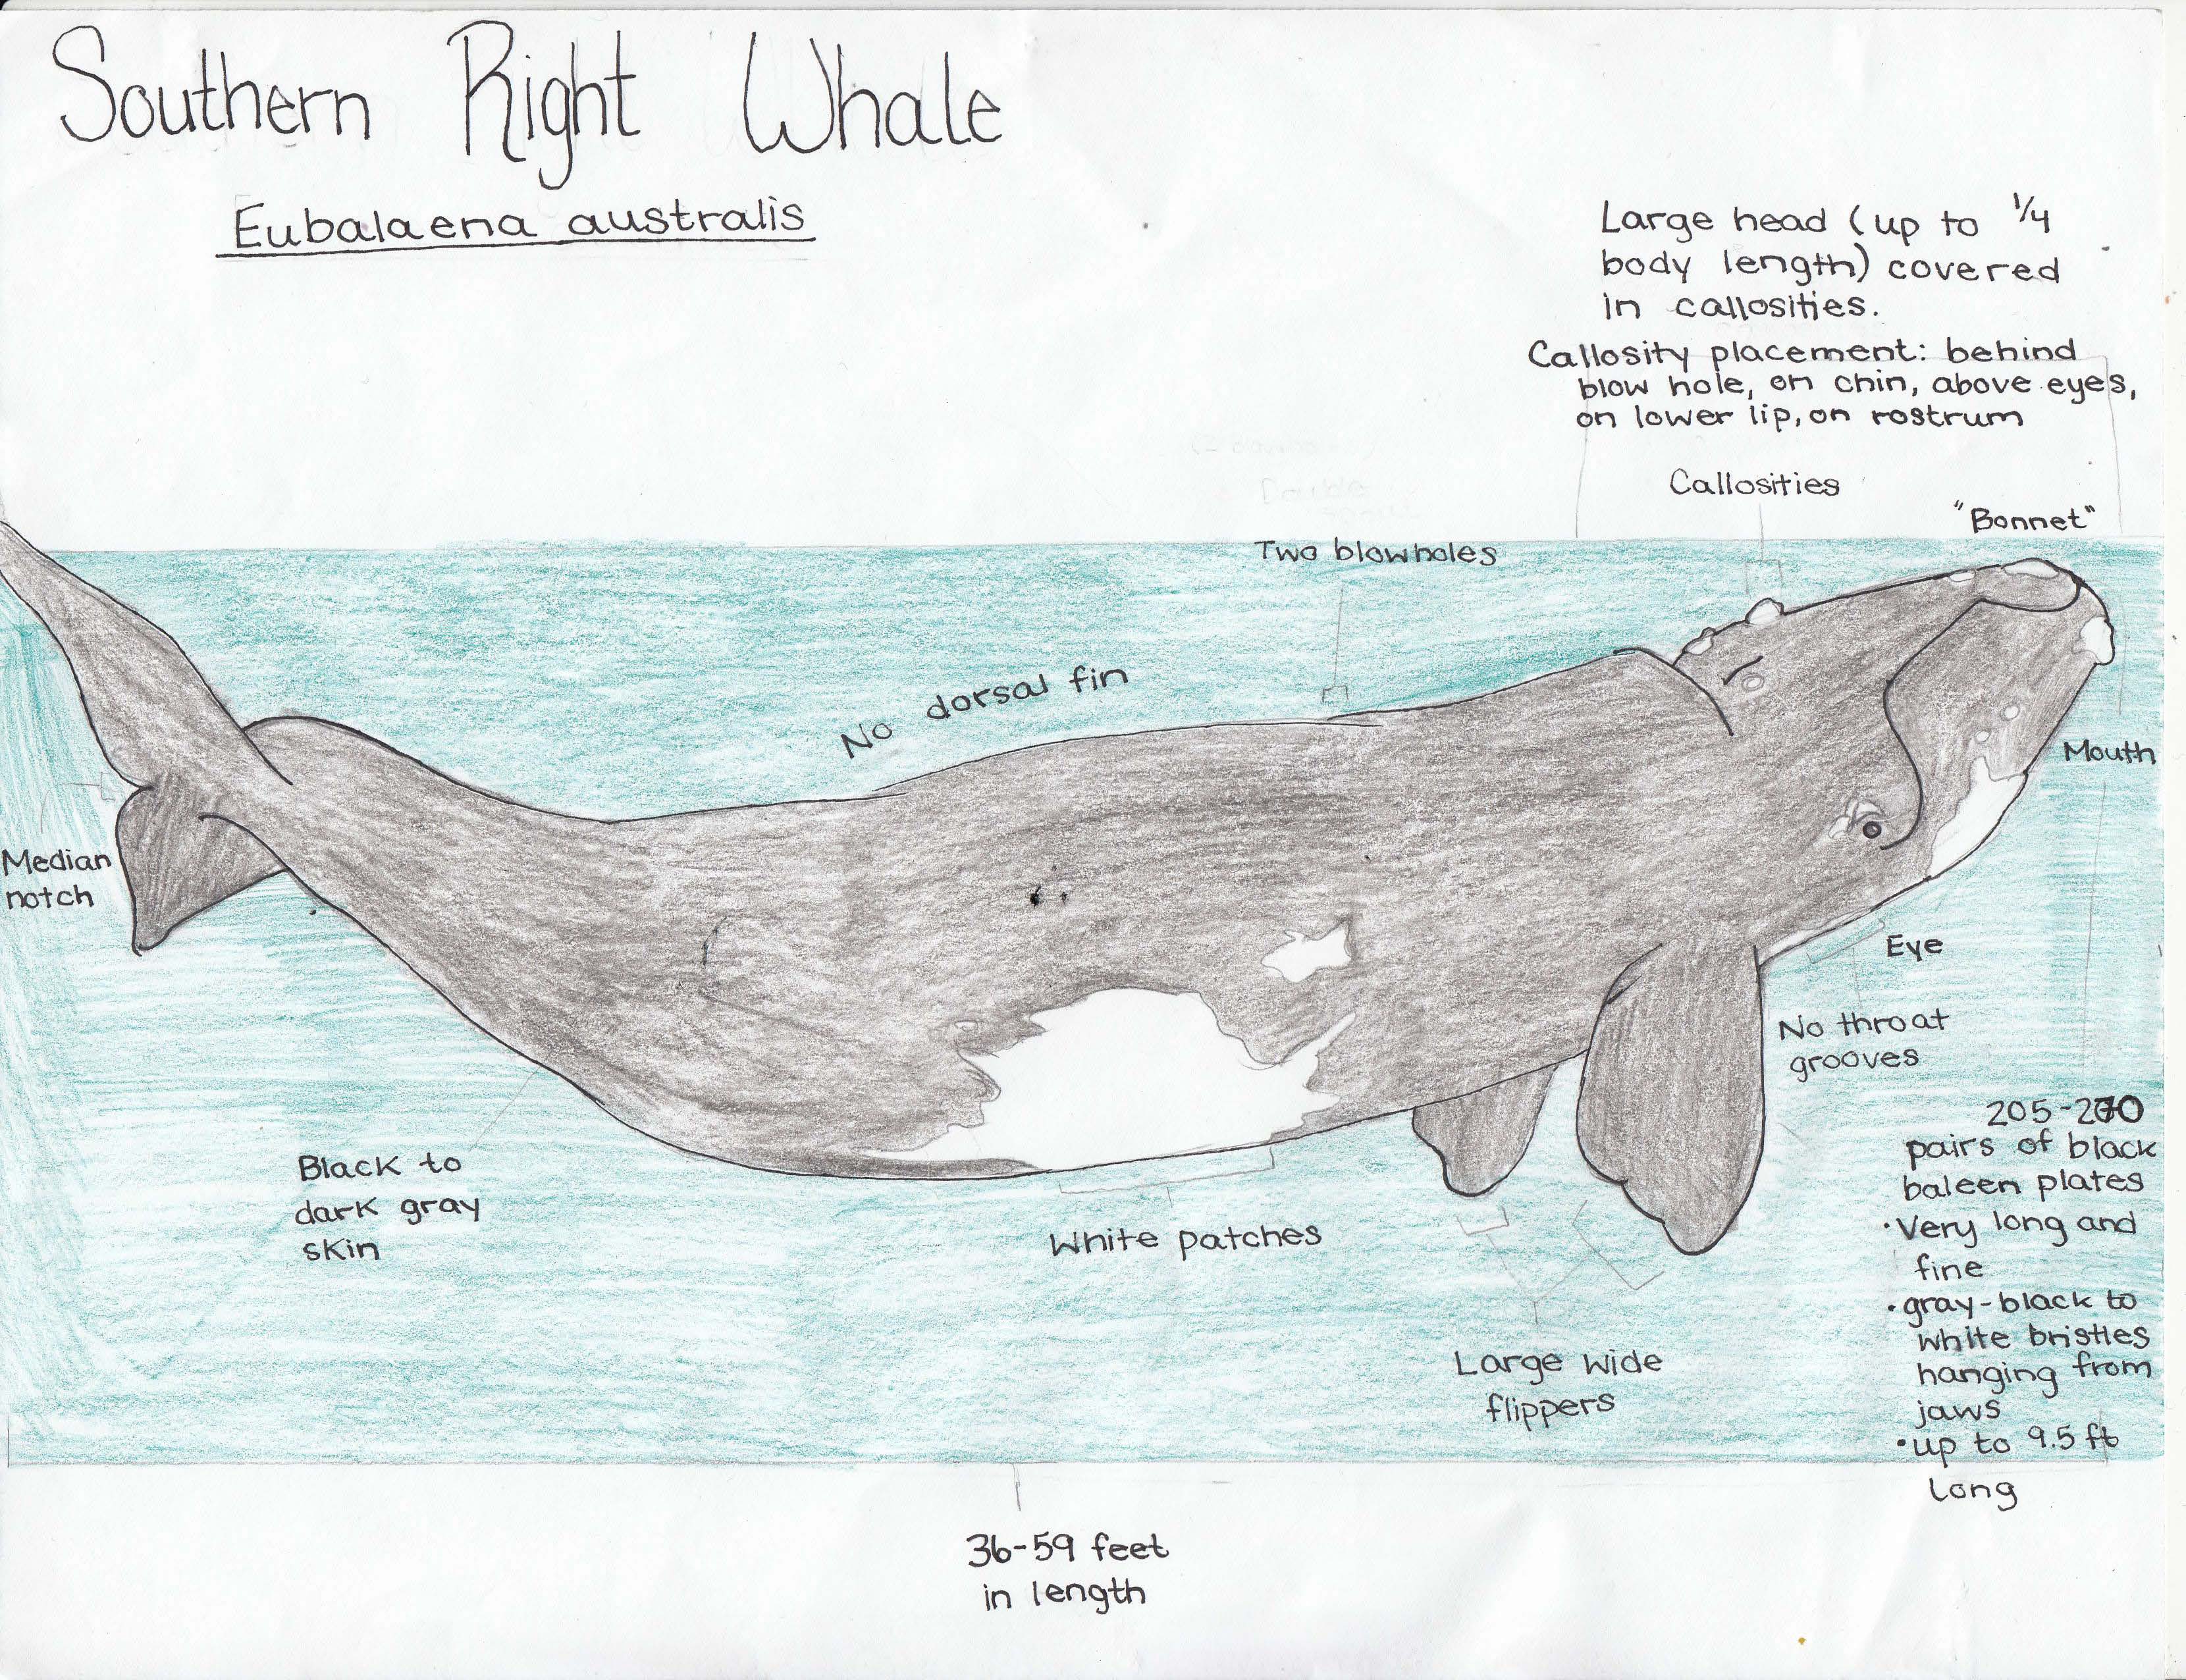 Southern Right Whale drawn by Morgan Langworthy